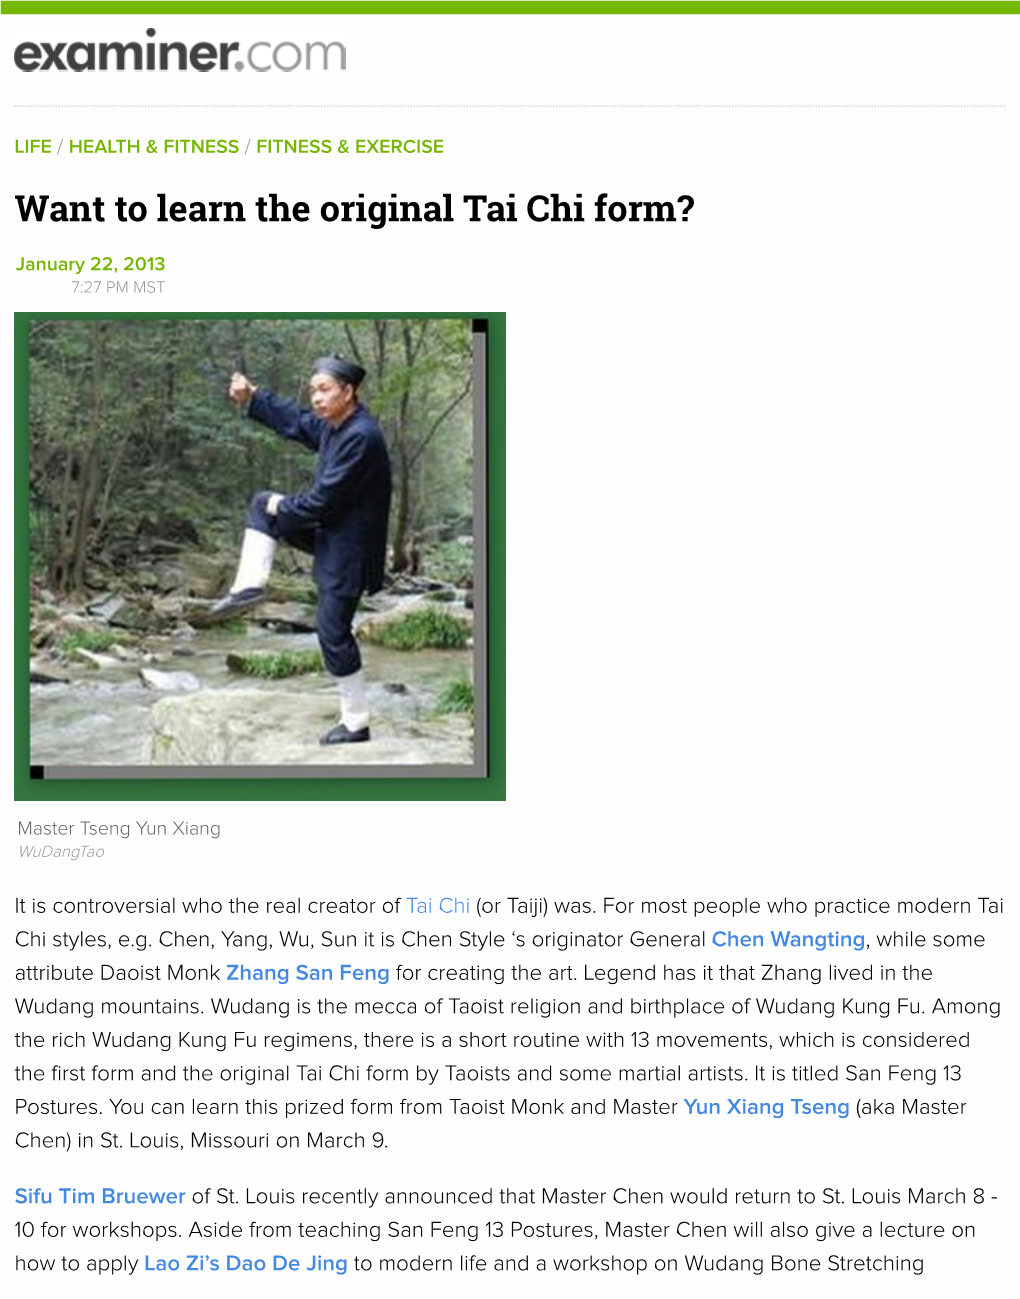 Want to Learn the Original Tai Chi Form?